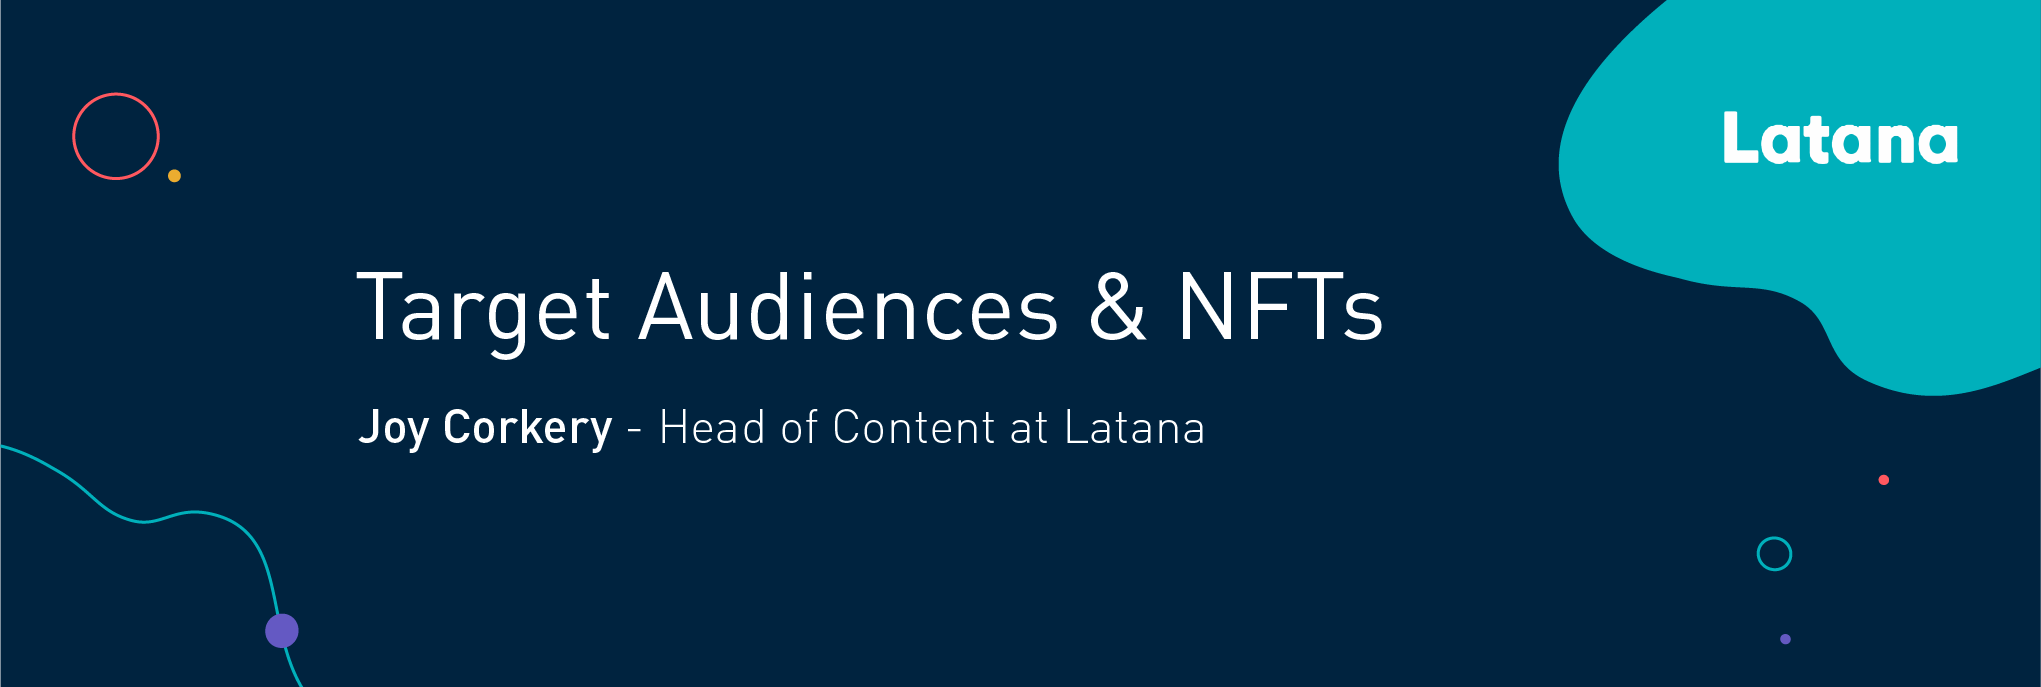 How B2B Marketers can Engage in the Metaverse Target Audiences & NFTs Joy Corkery - Head of Content at Latana